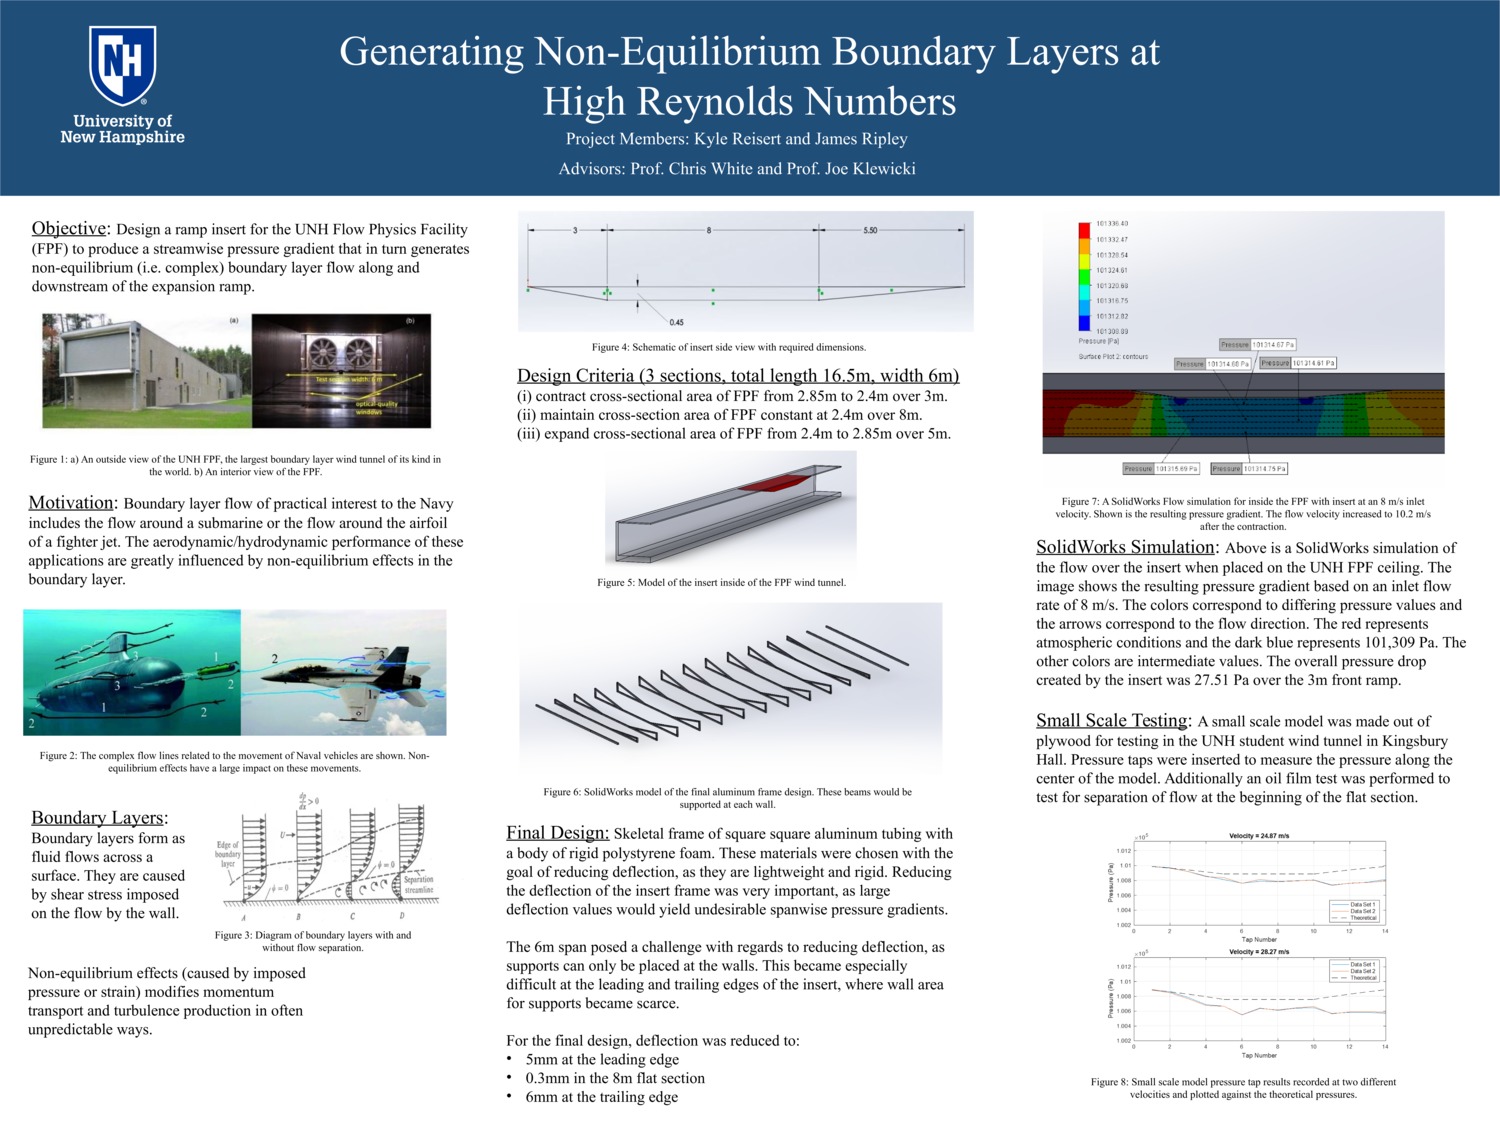 Generating Non-Equilibrium Boundary Layers by jmr2008